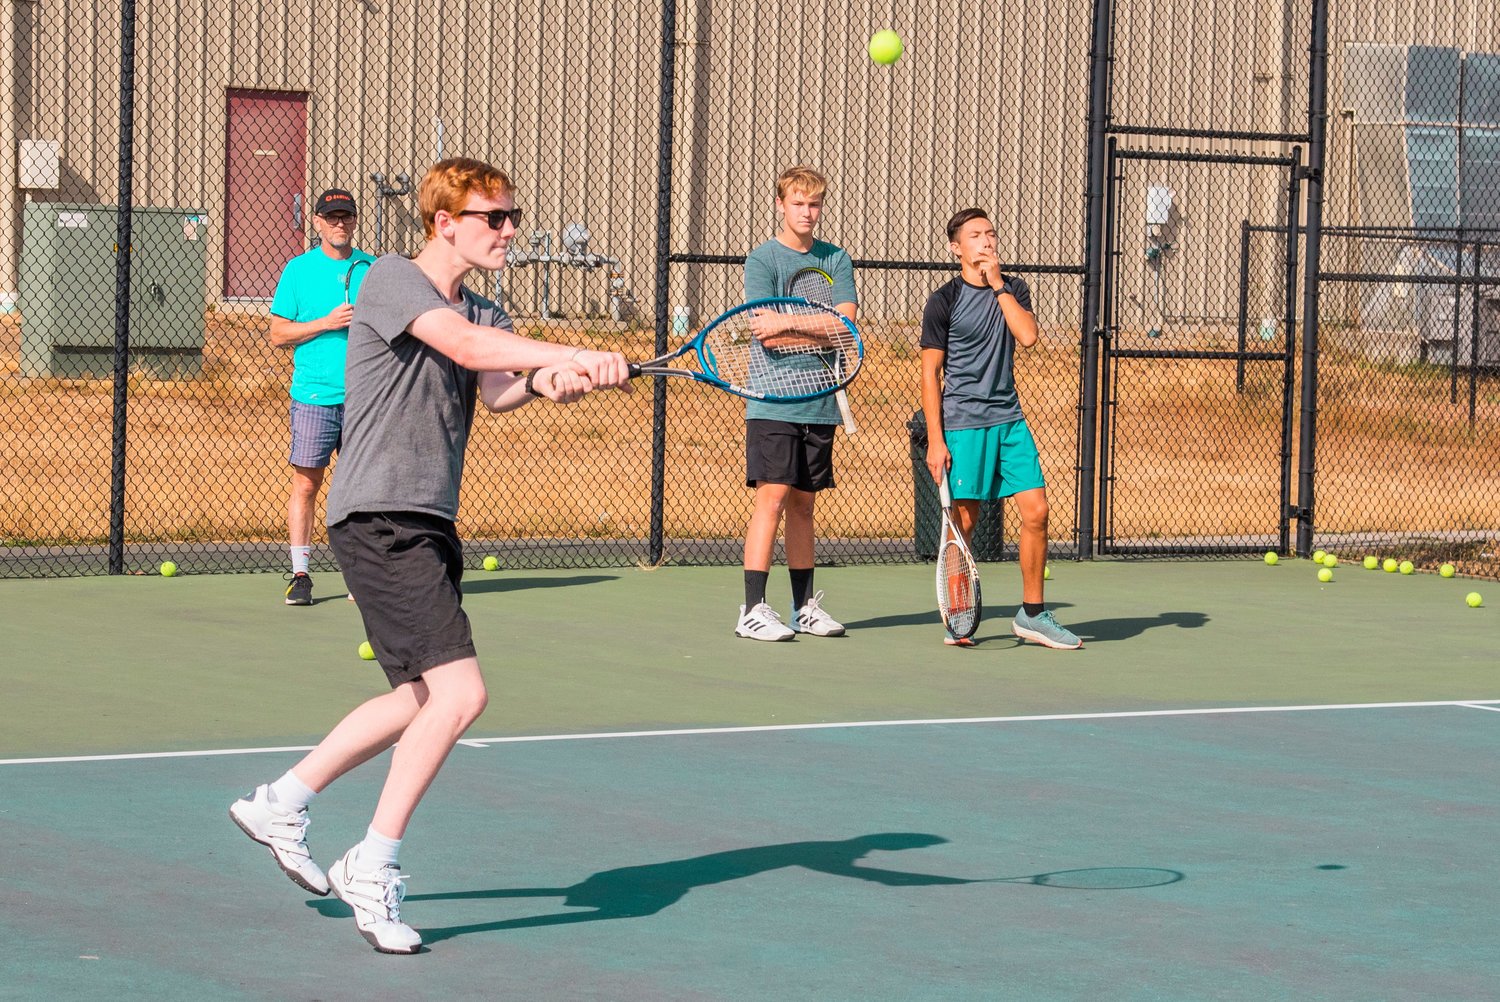 Players work on ball return during tennis practice near Tiger Stadium in Centralia on Tuesday.